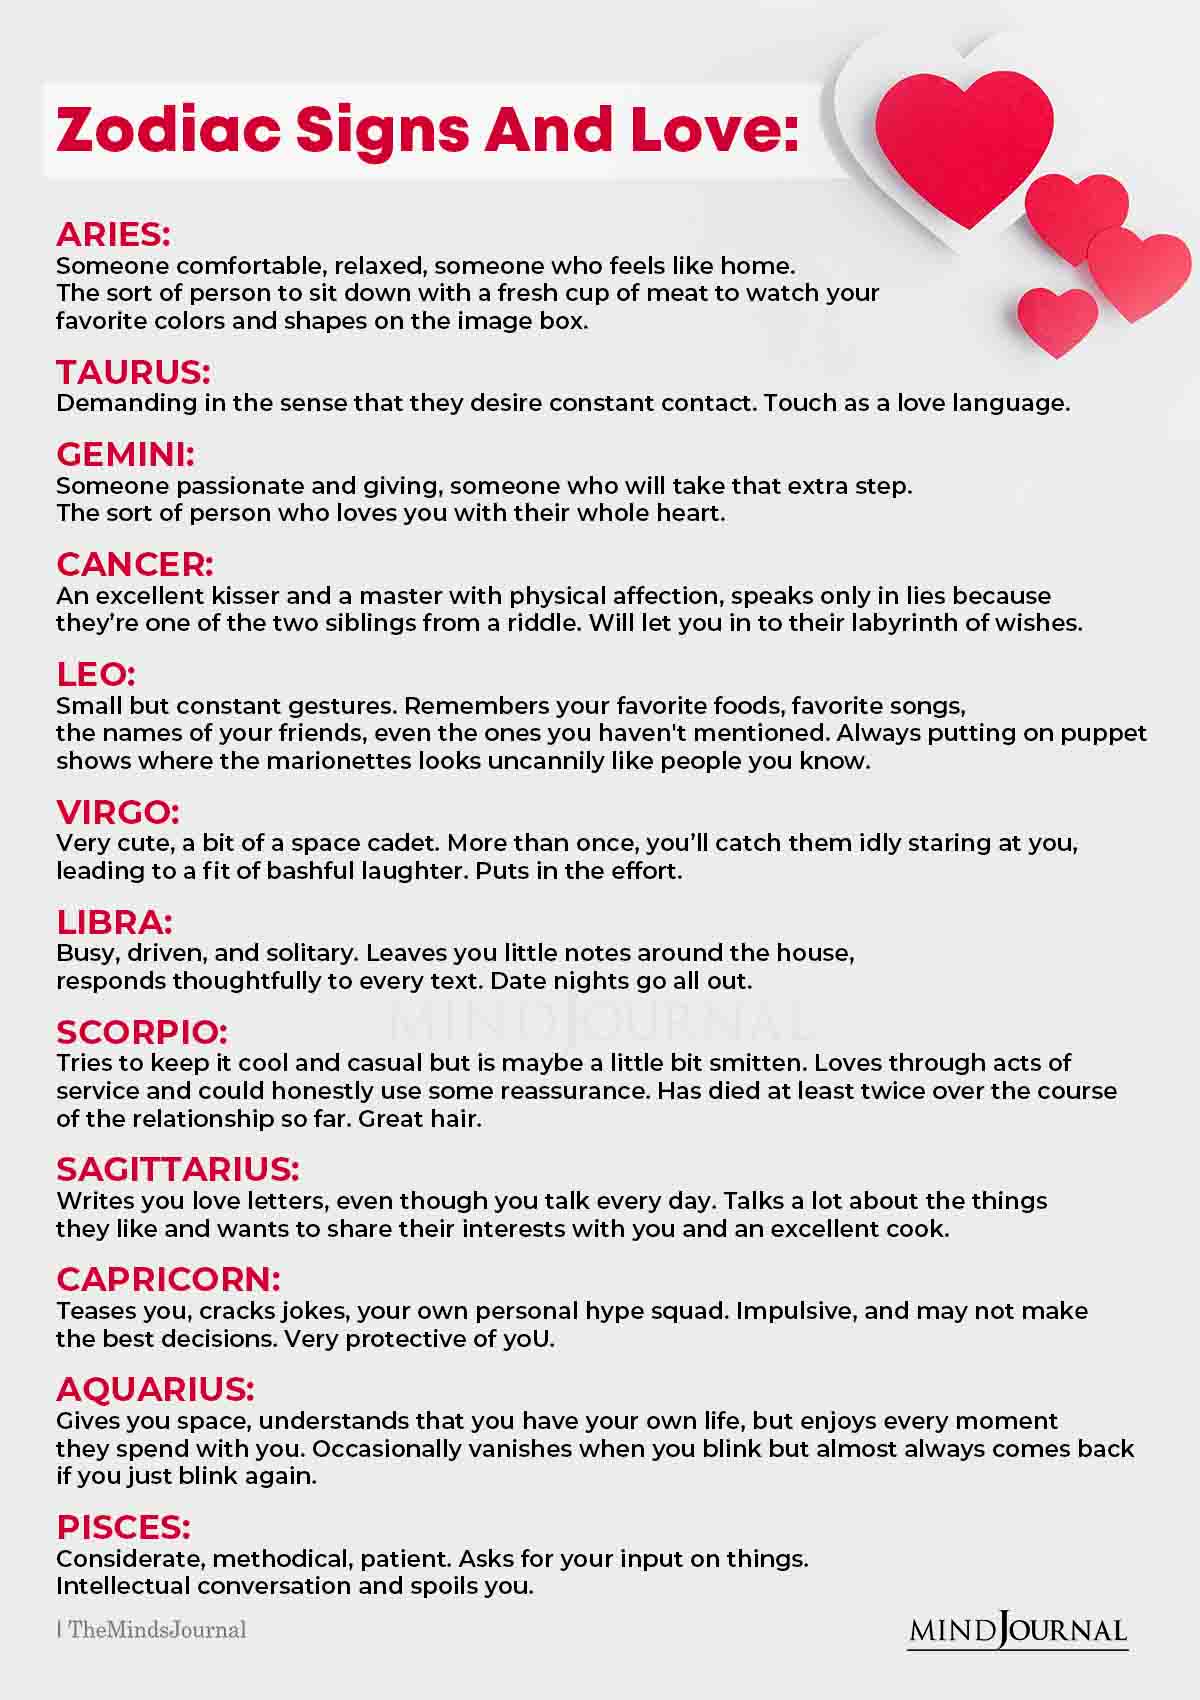 The Zodiac Signs and Love